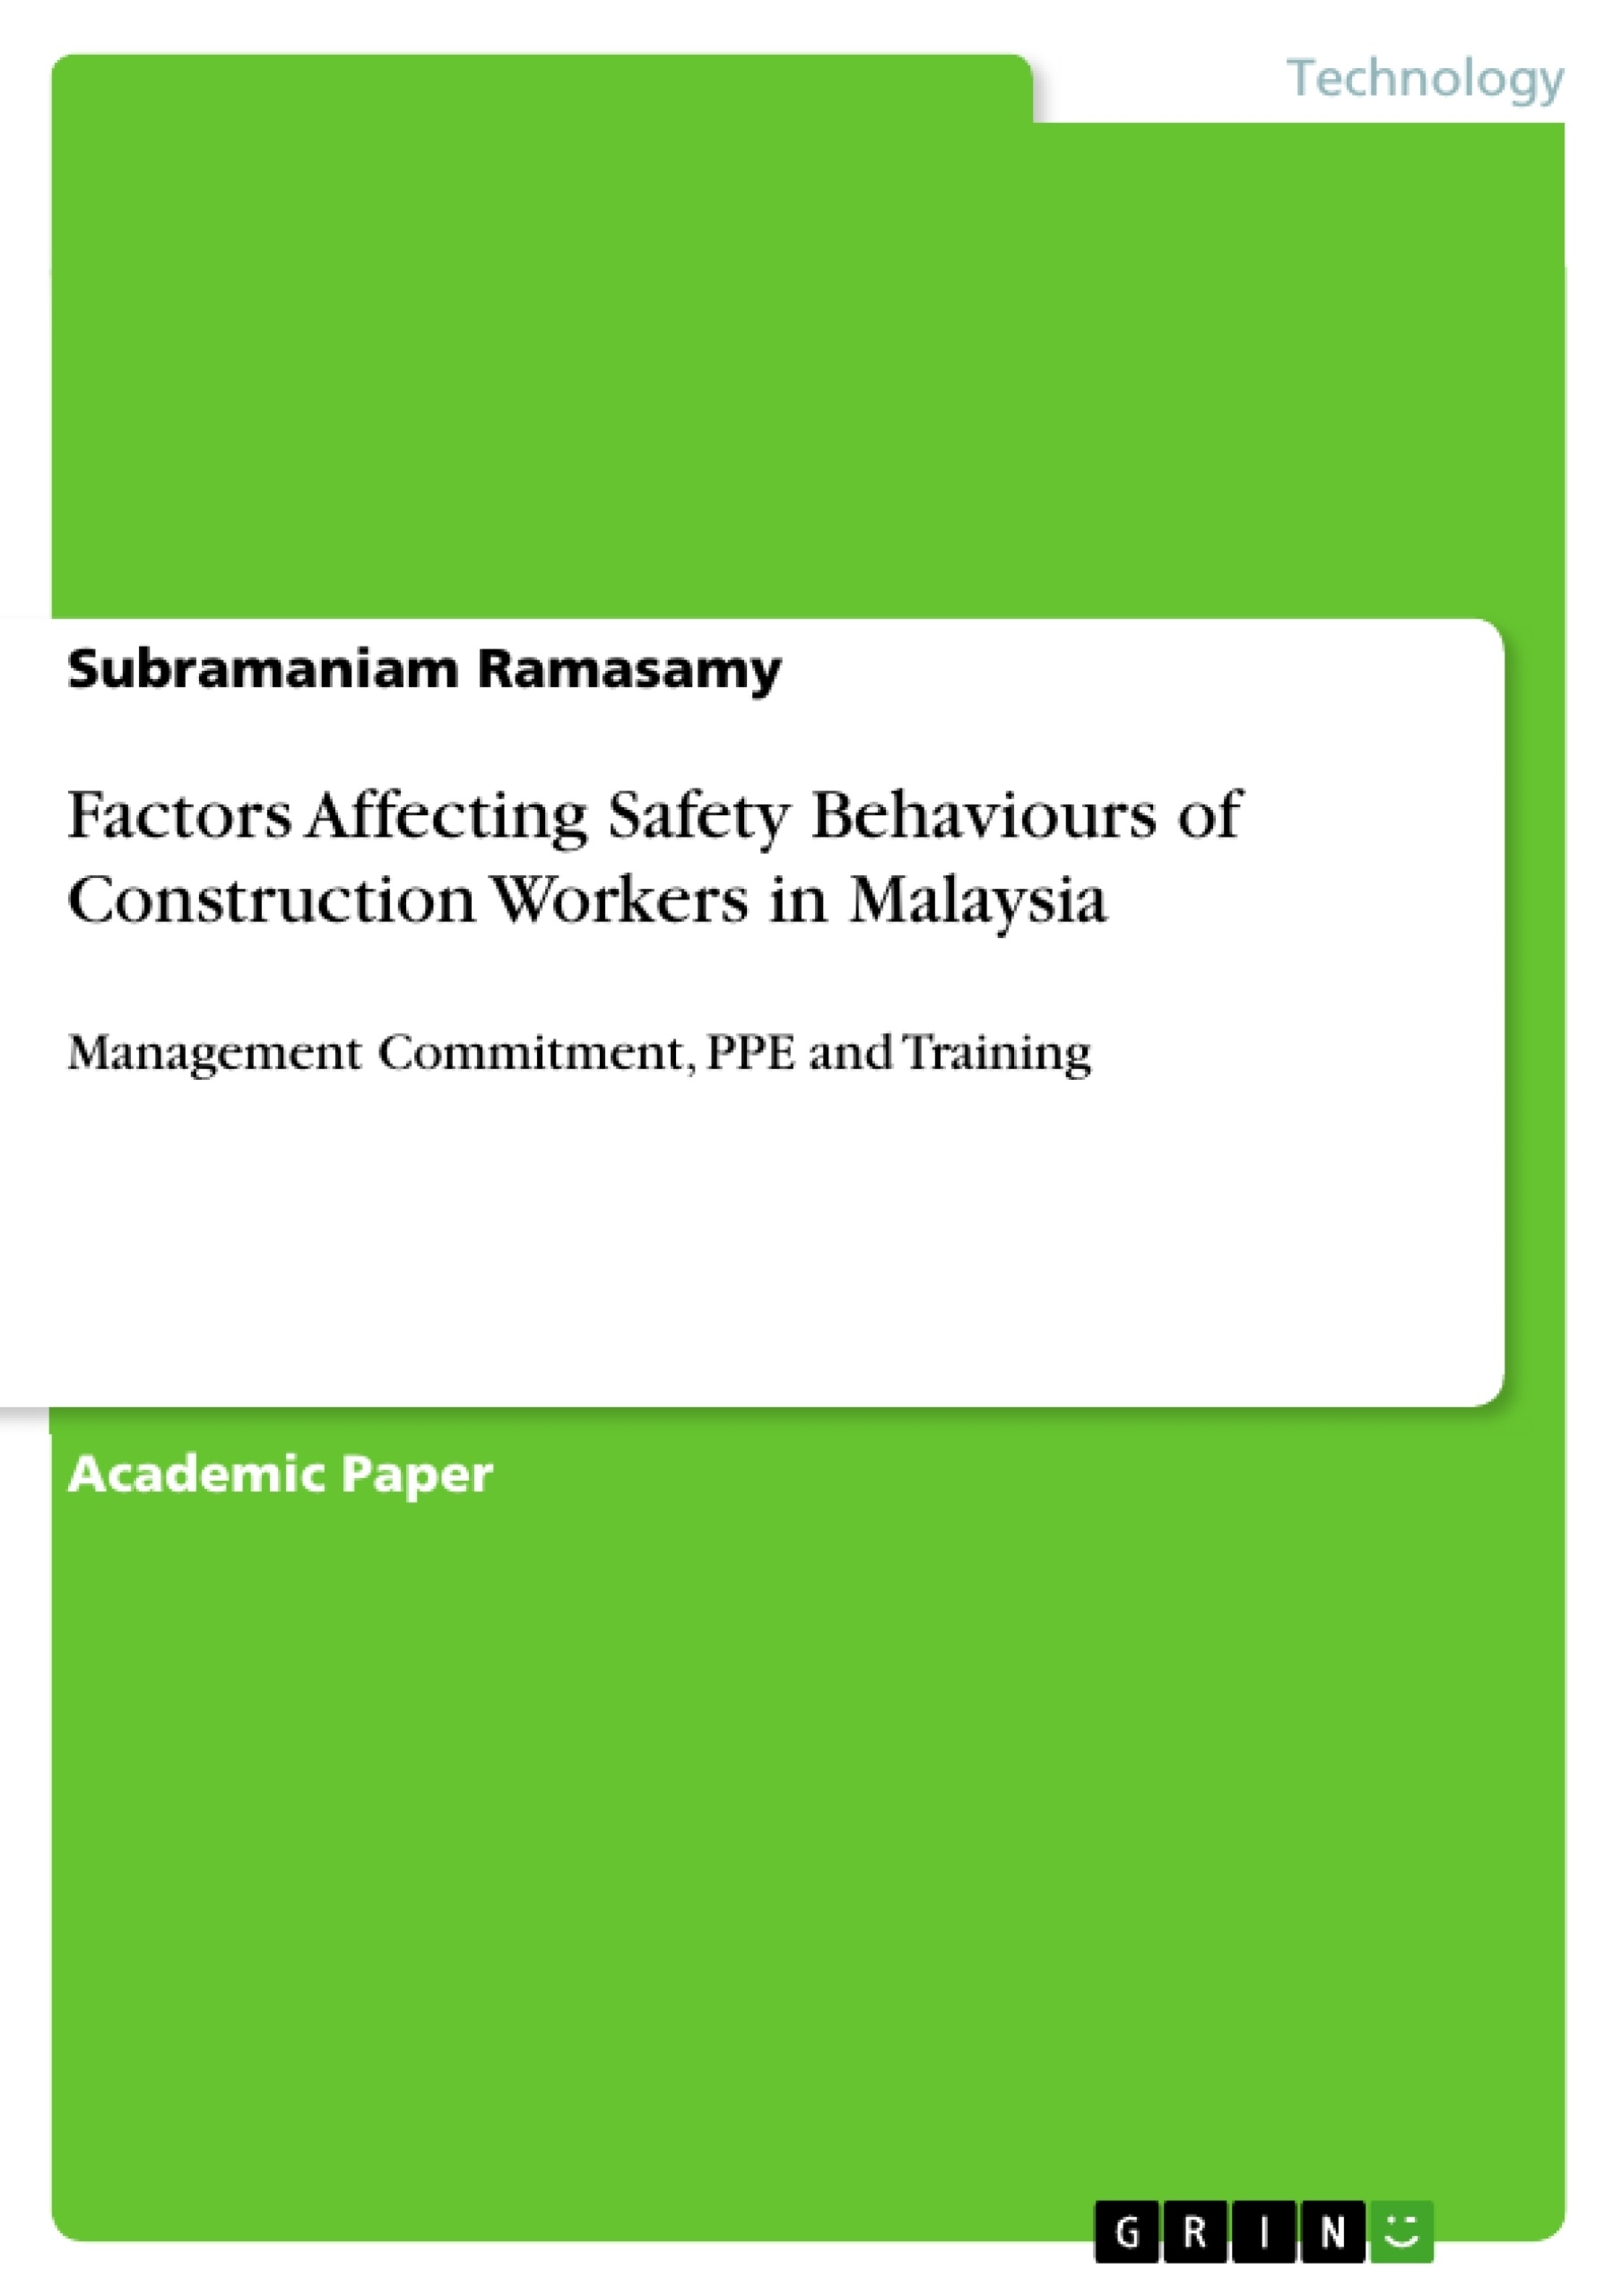 Title: Factors Affecting Safety Behaviours of Construction Workers in Malaysia